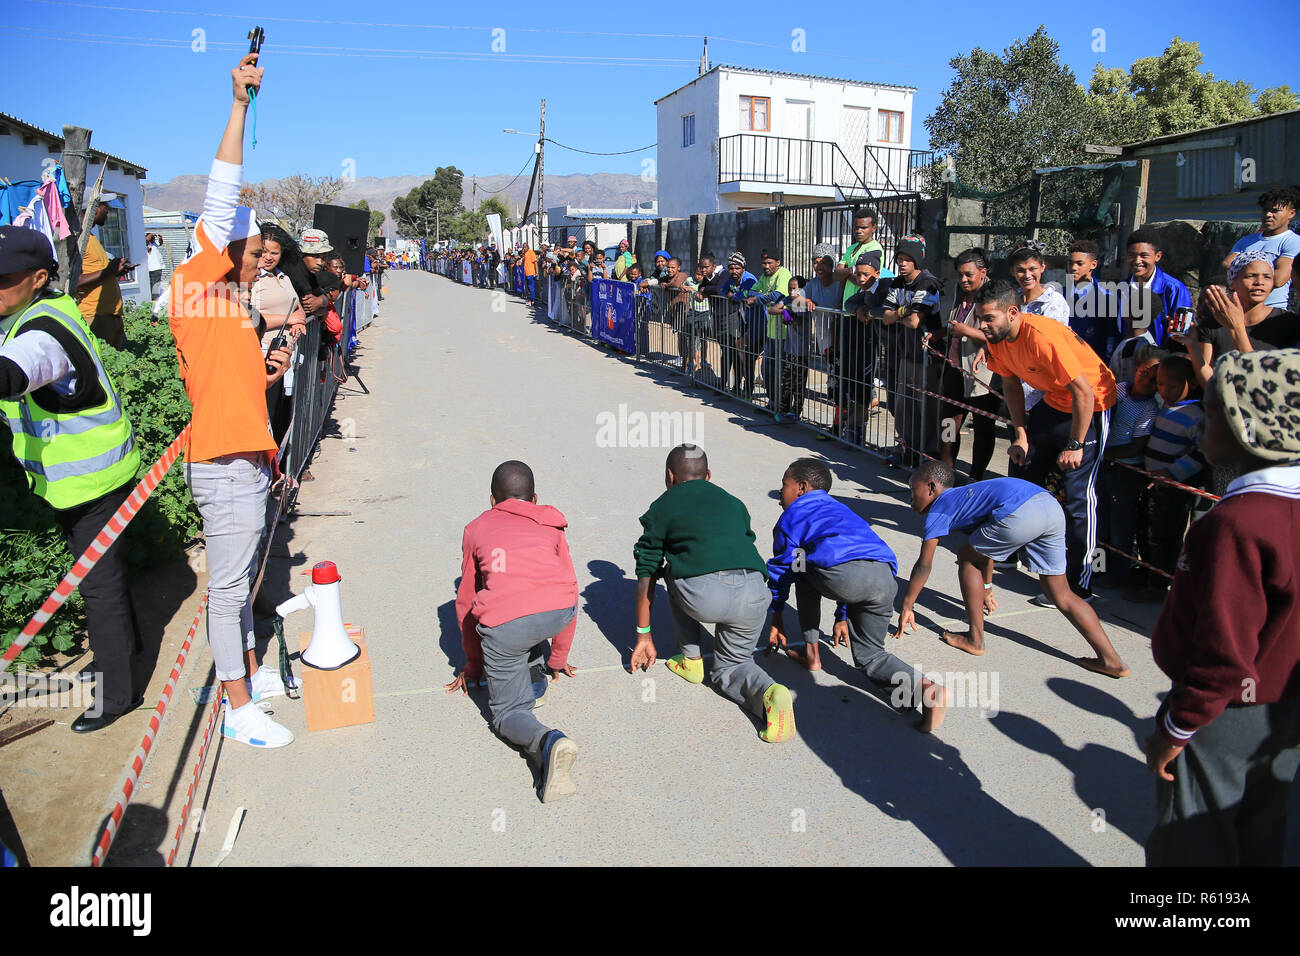 CAPE TOWN, SOUTH AFRICA - Wednesday 29 August 2018, members of the public, school children and residents of Lumka Street in Nomzamo in Strand, participate in the Western Province Athletics (WPA) Street Athletics programme.  Children of all ages and adults, get to run various distances from 50m to 200m in a closed-off street within a residential area. These events are organised by the WPA Development office. Photo by Roger Sedres for WP Athletics Stock Photo